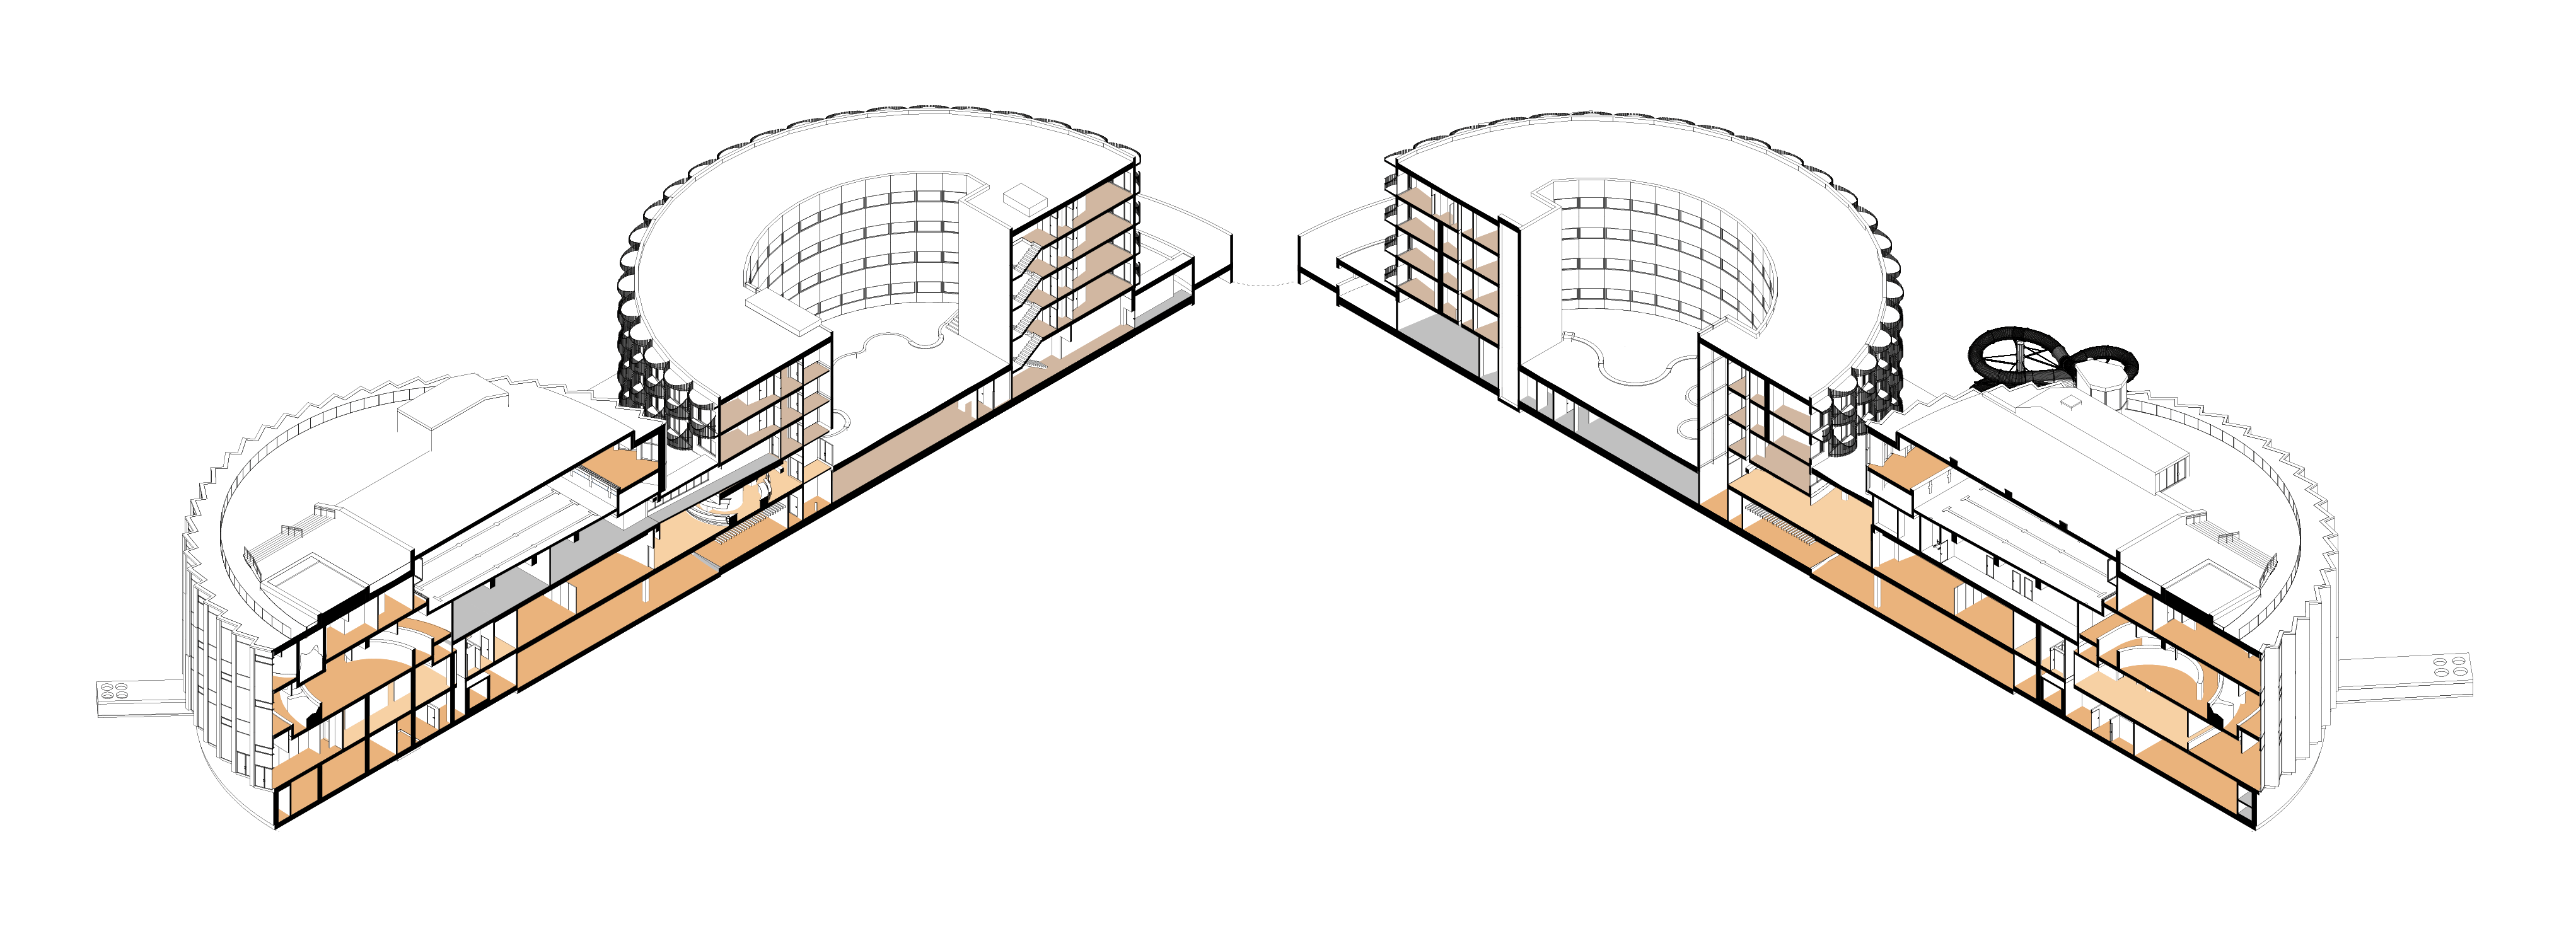 3D section